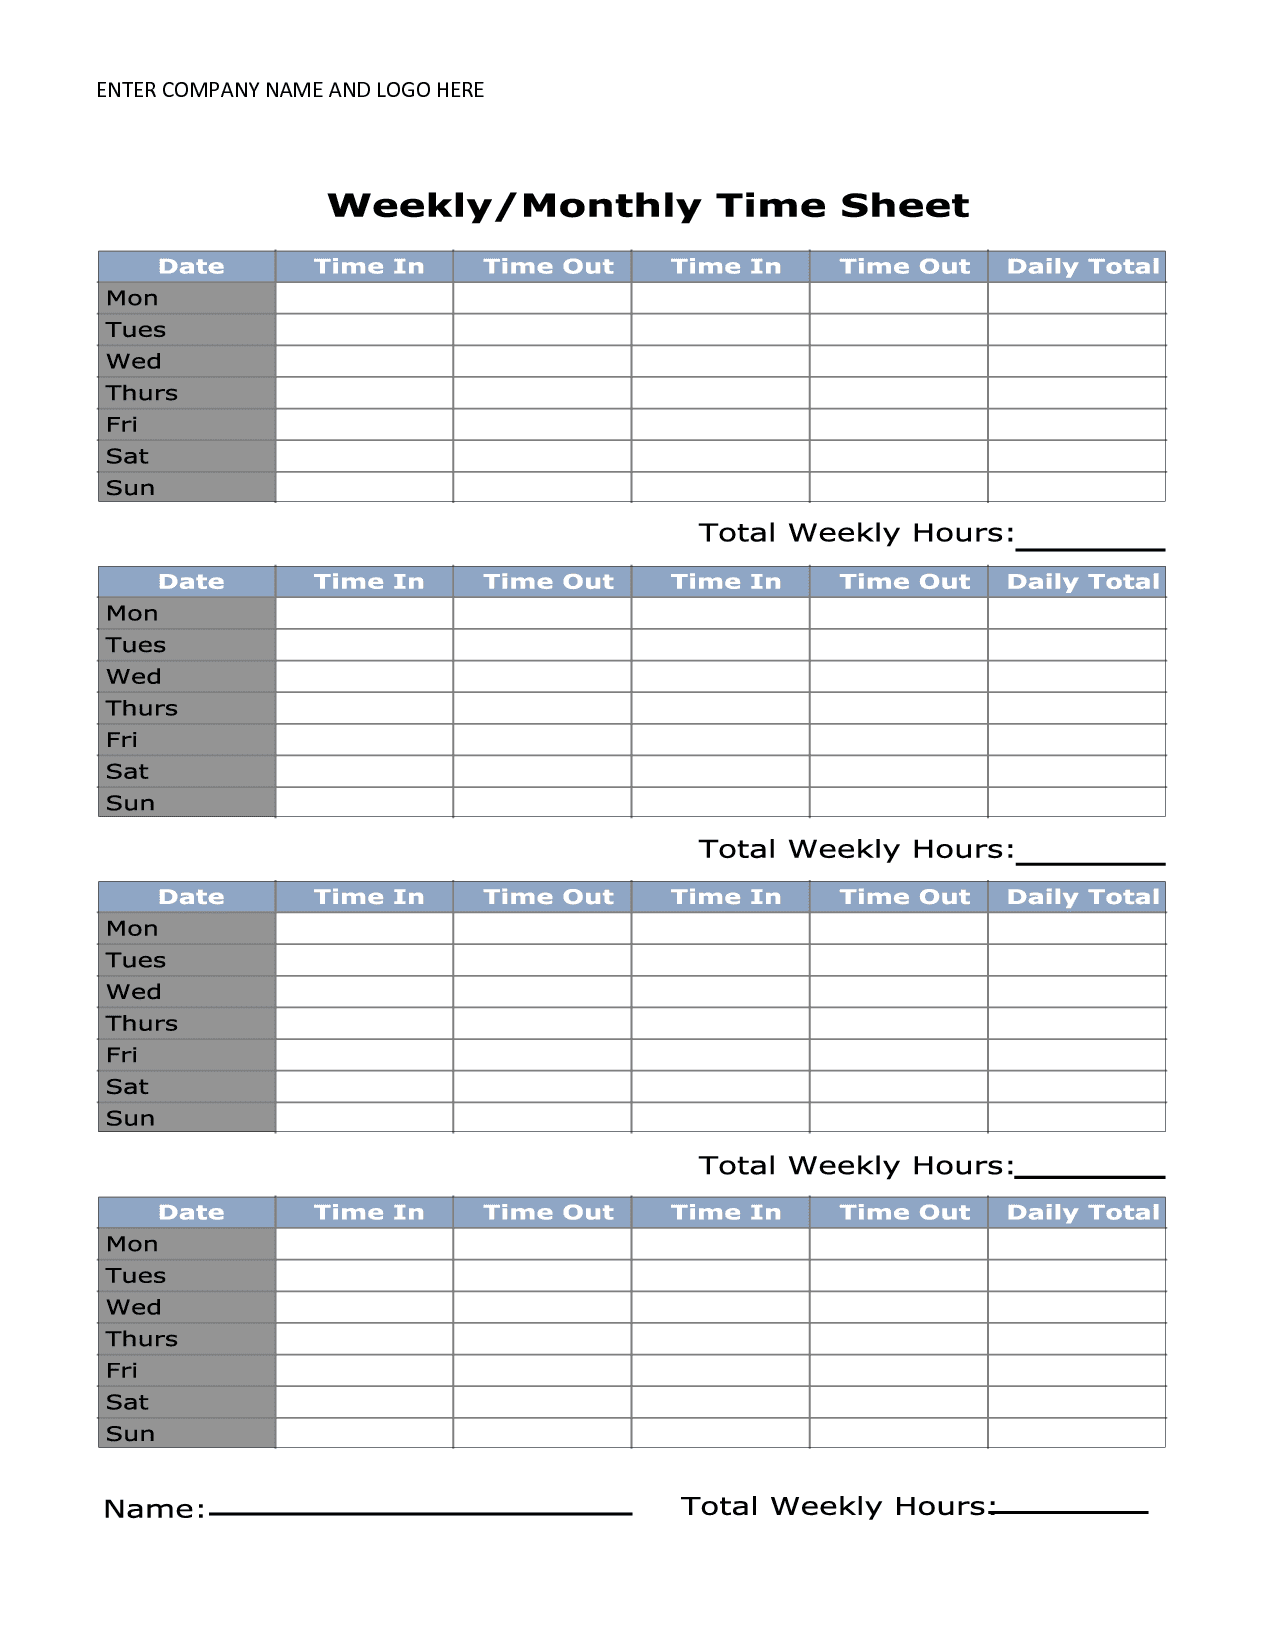 Sample Timesheets For Employees And Sample Time Sheets Excel